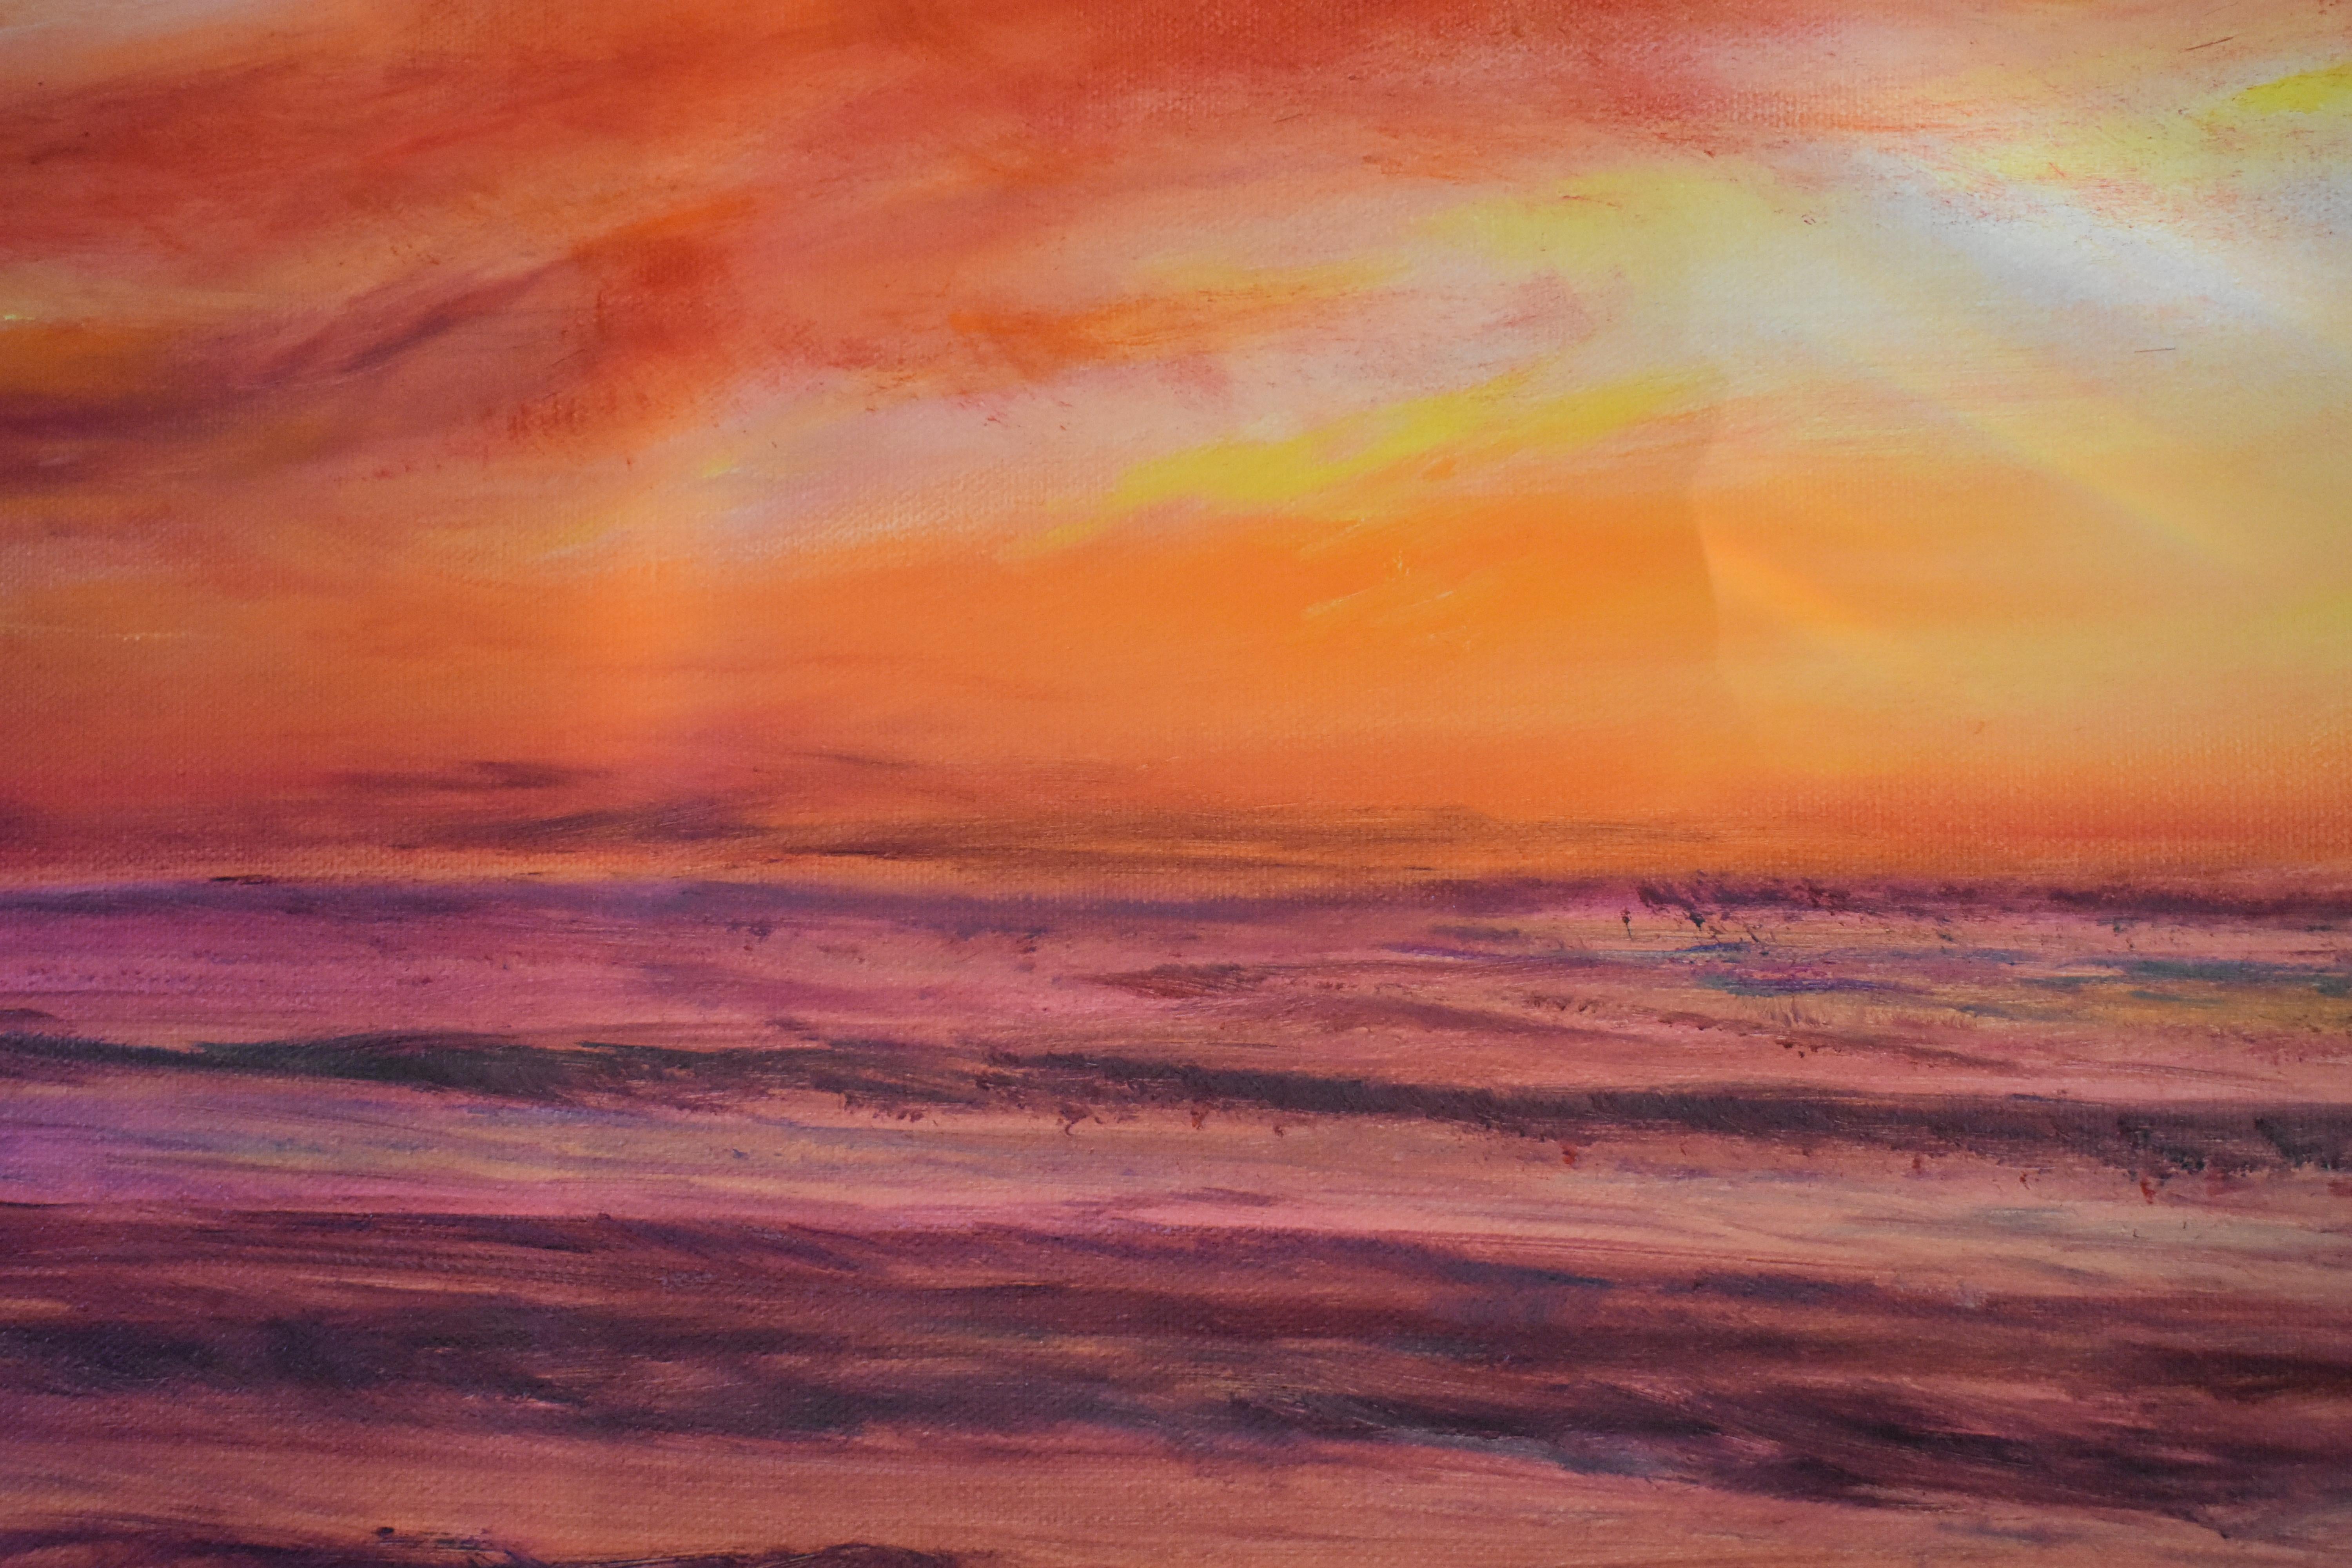 Most of my artwork relates to oceans and skies. Growing up near the shore in Bombay, I was fascinated by the colorful sunsets, the monsoon clouds, and sounds of the waves at night when the city noise died away. The beauty in these waves, clouds and